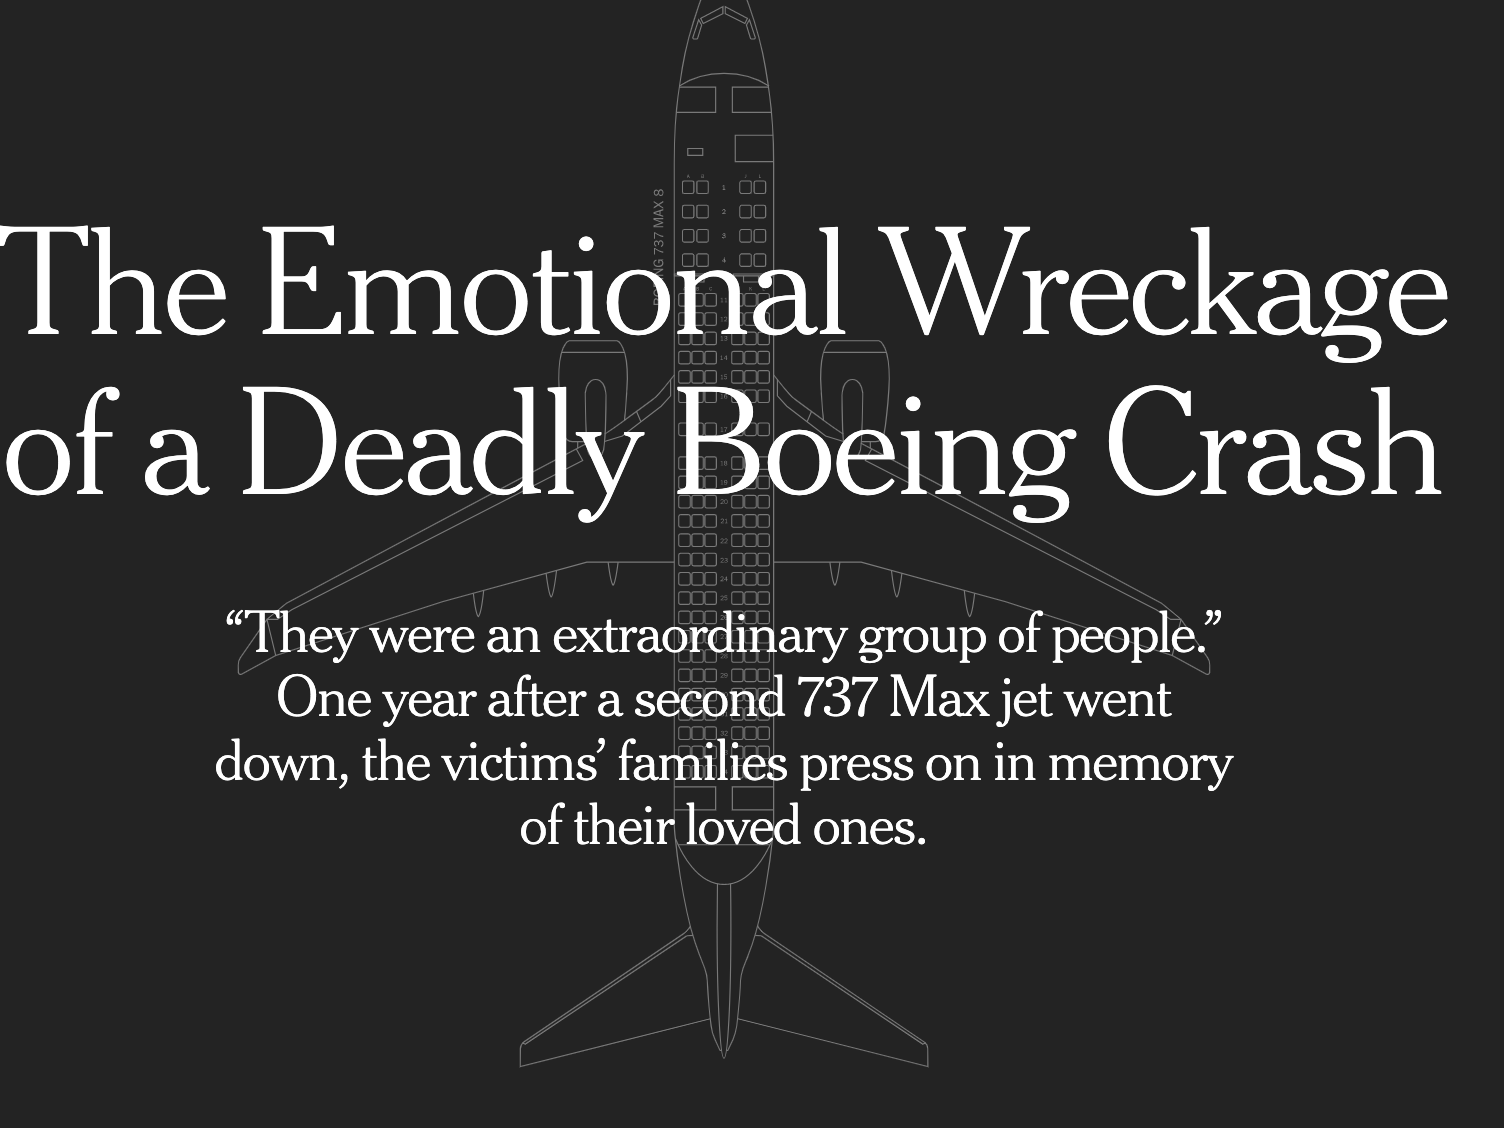 The Emotional Wreckage of a Deadly Boeing Crash